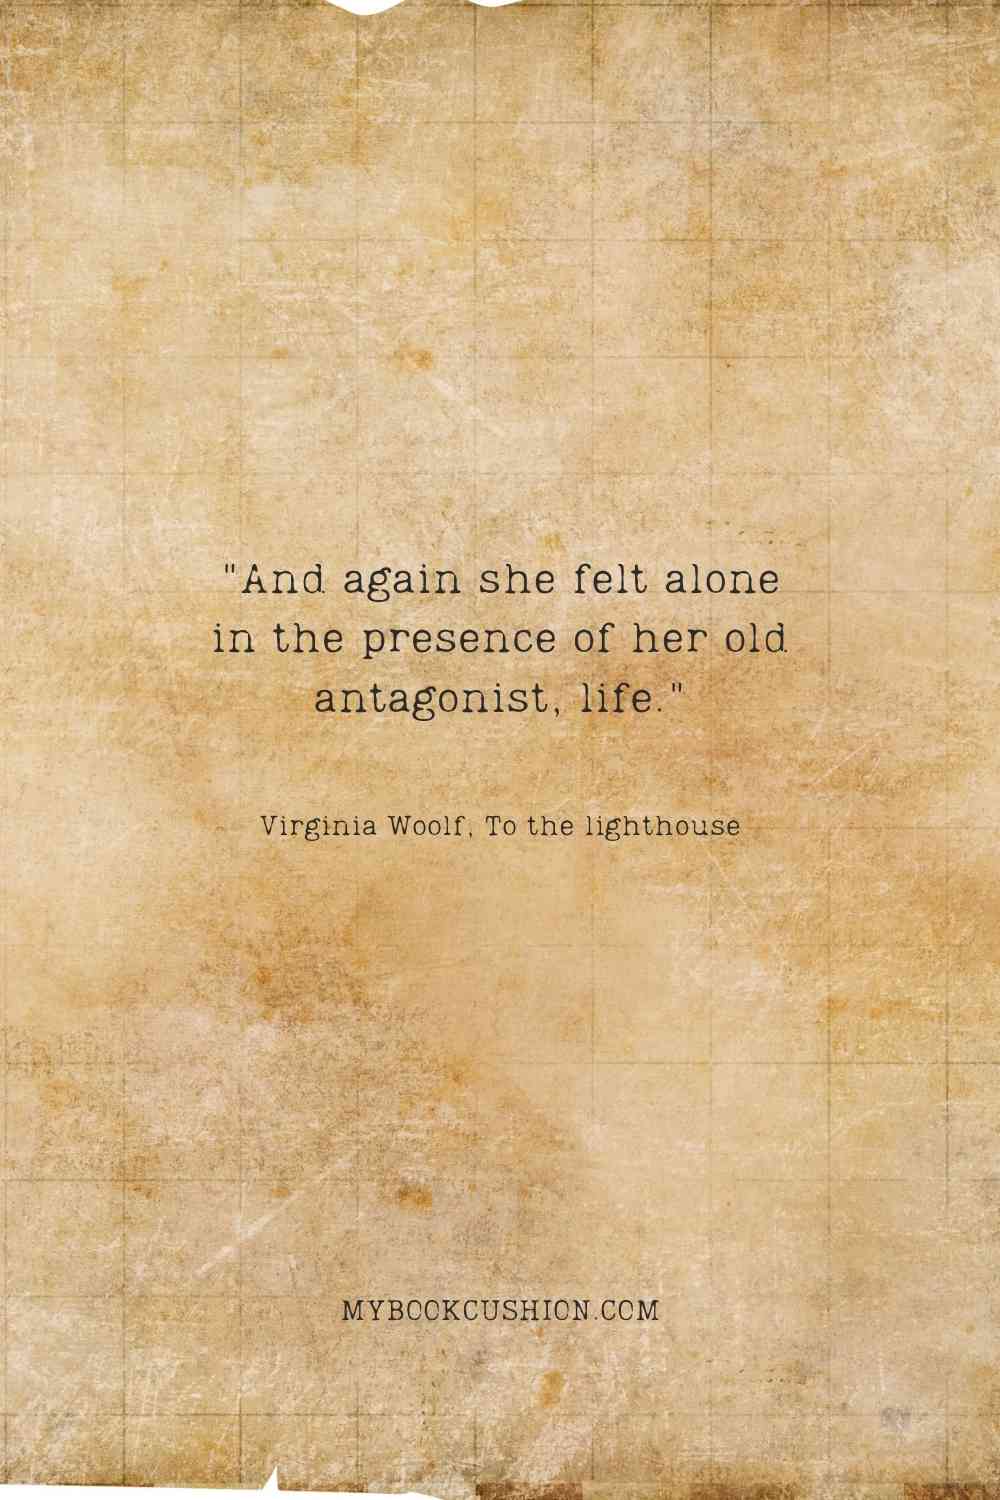 "And again she felt alone in the presence of her old antagonist, life." - Virginia Woolf, To the lighthouse